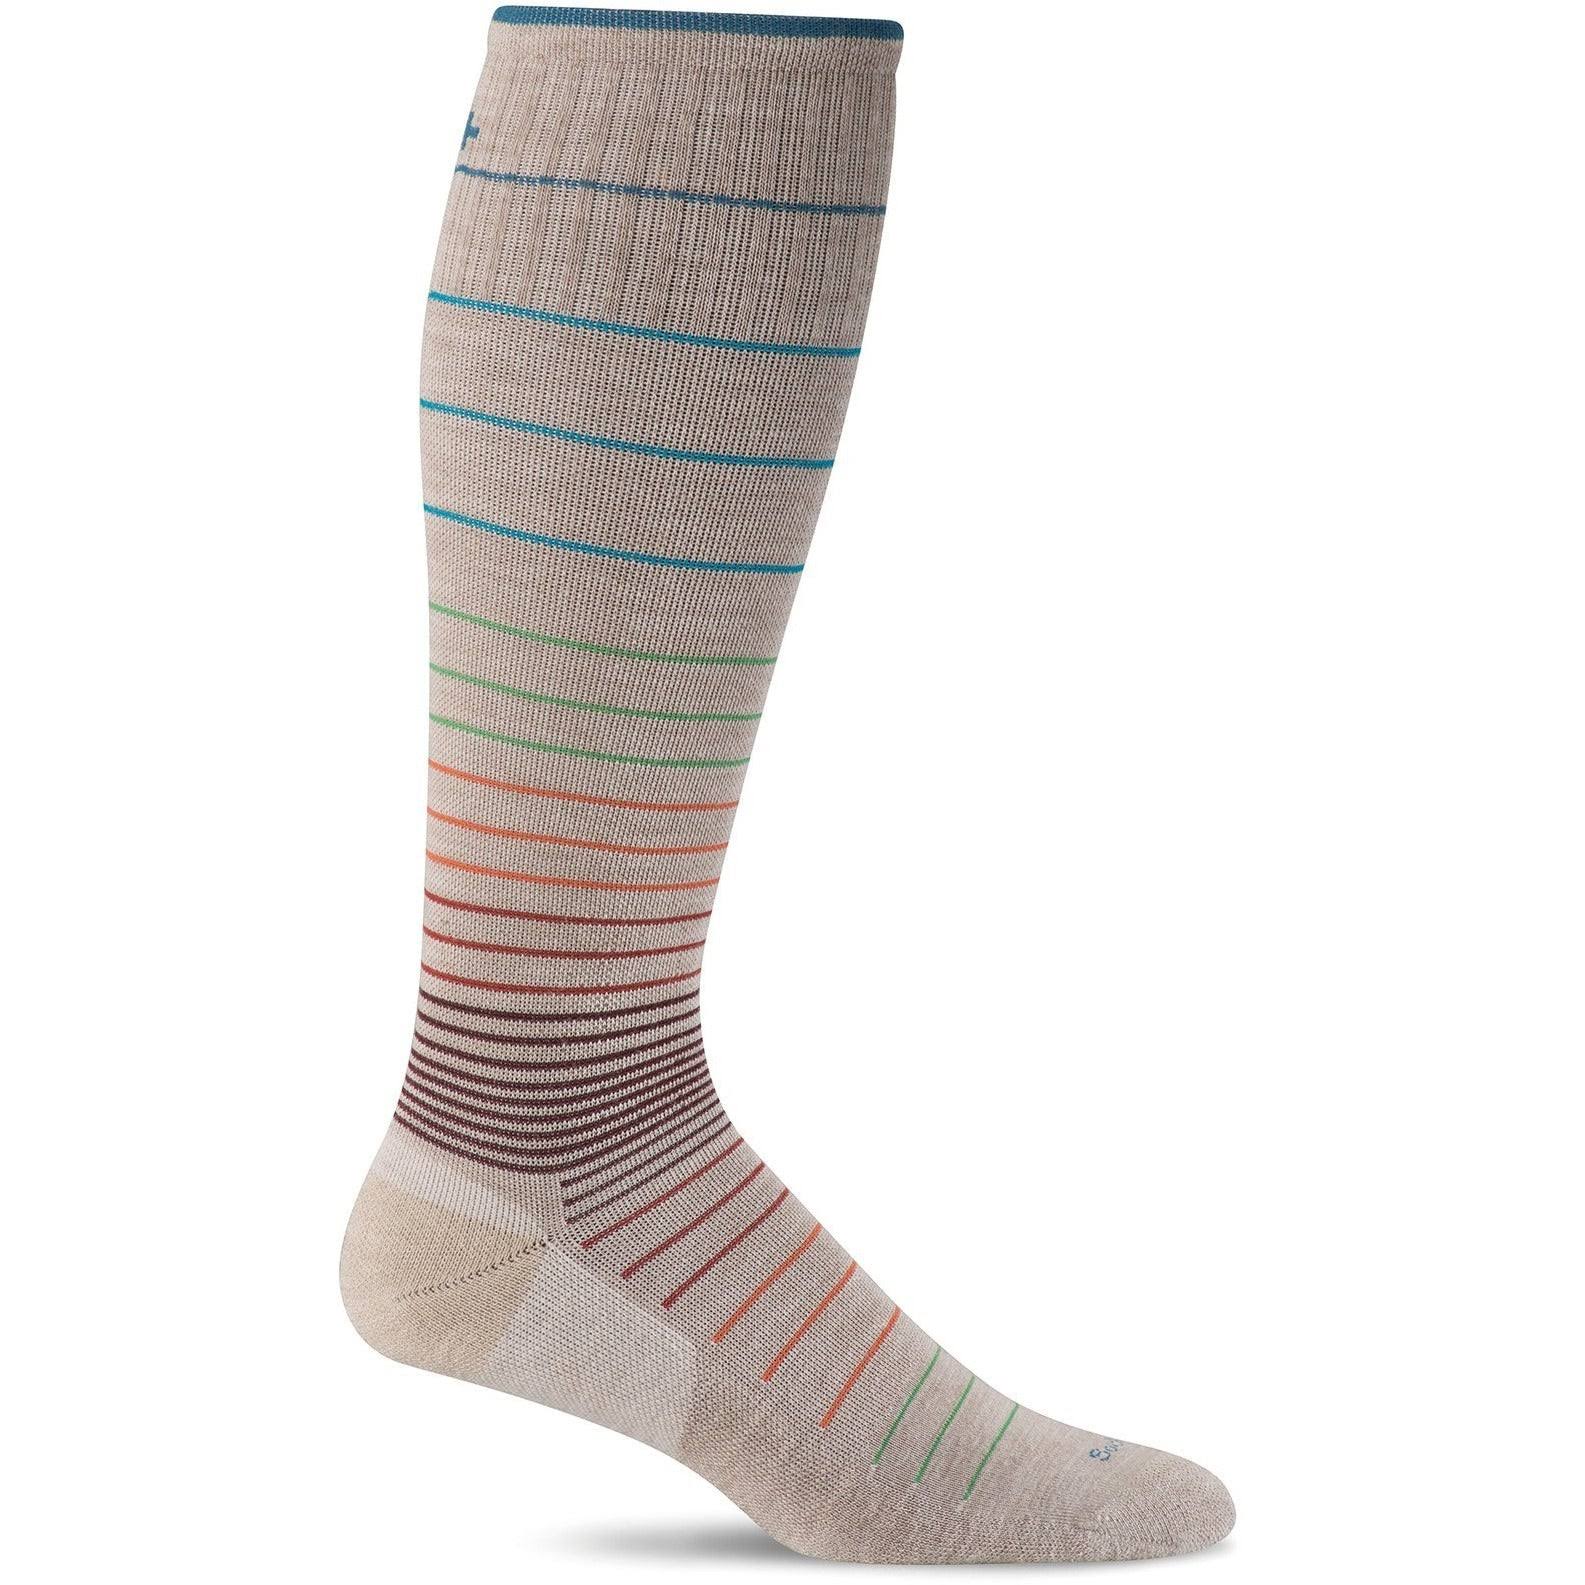 Sockwell Womens Circulator Travel Compression Therapy Socks